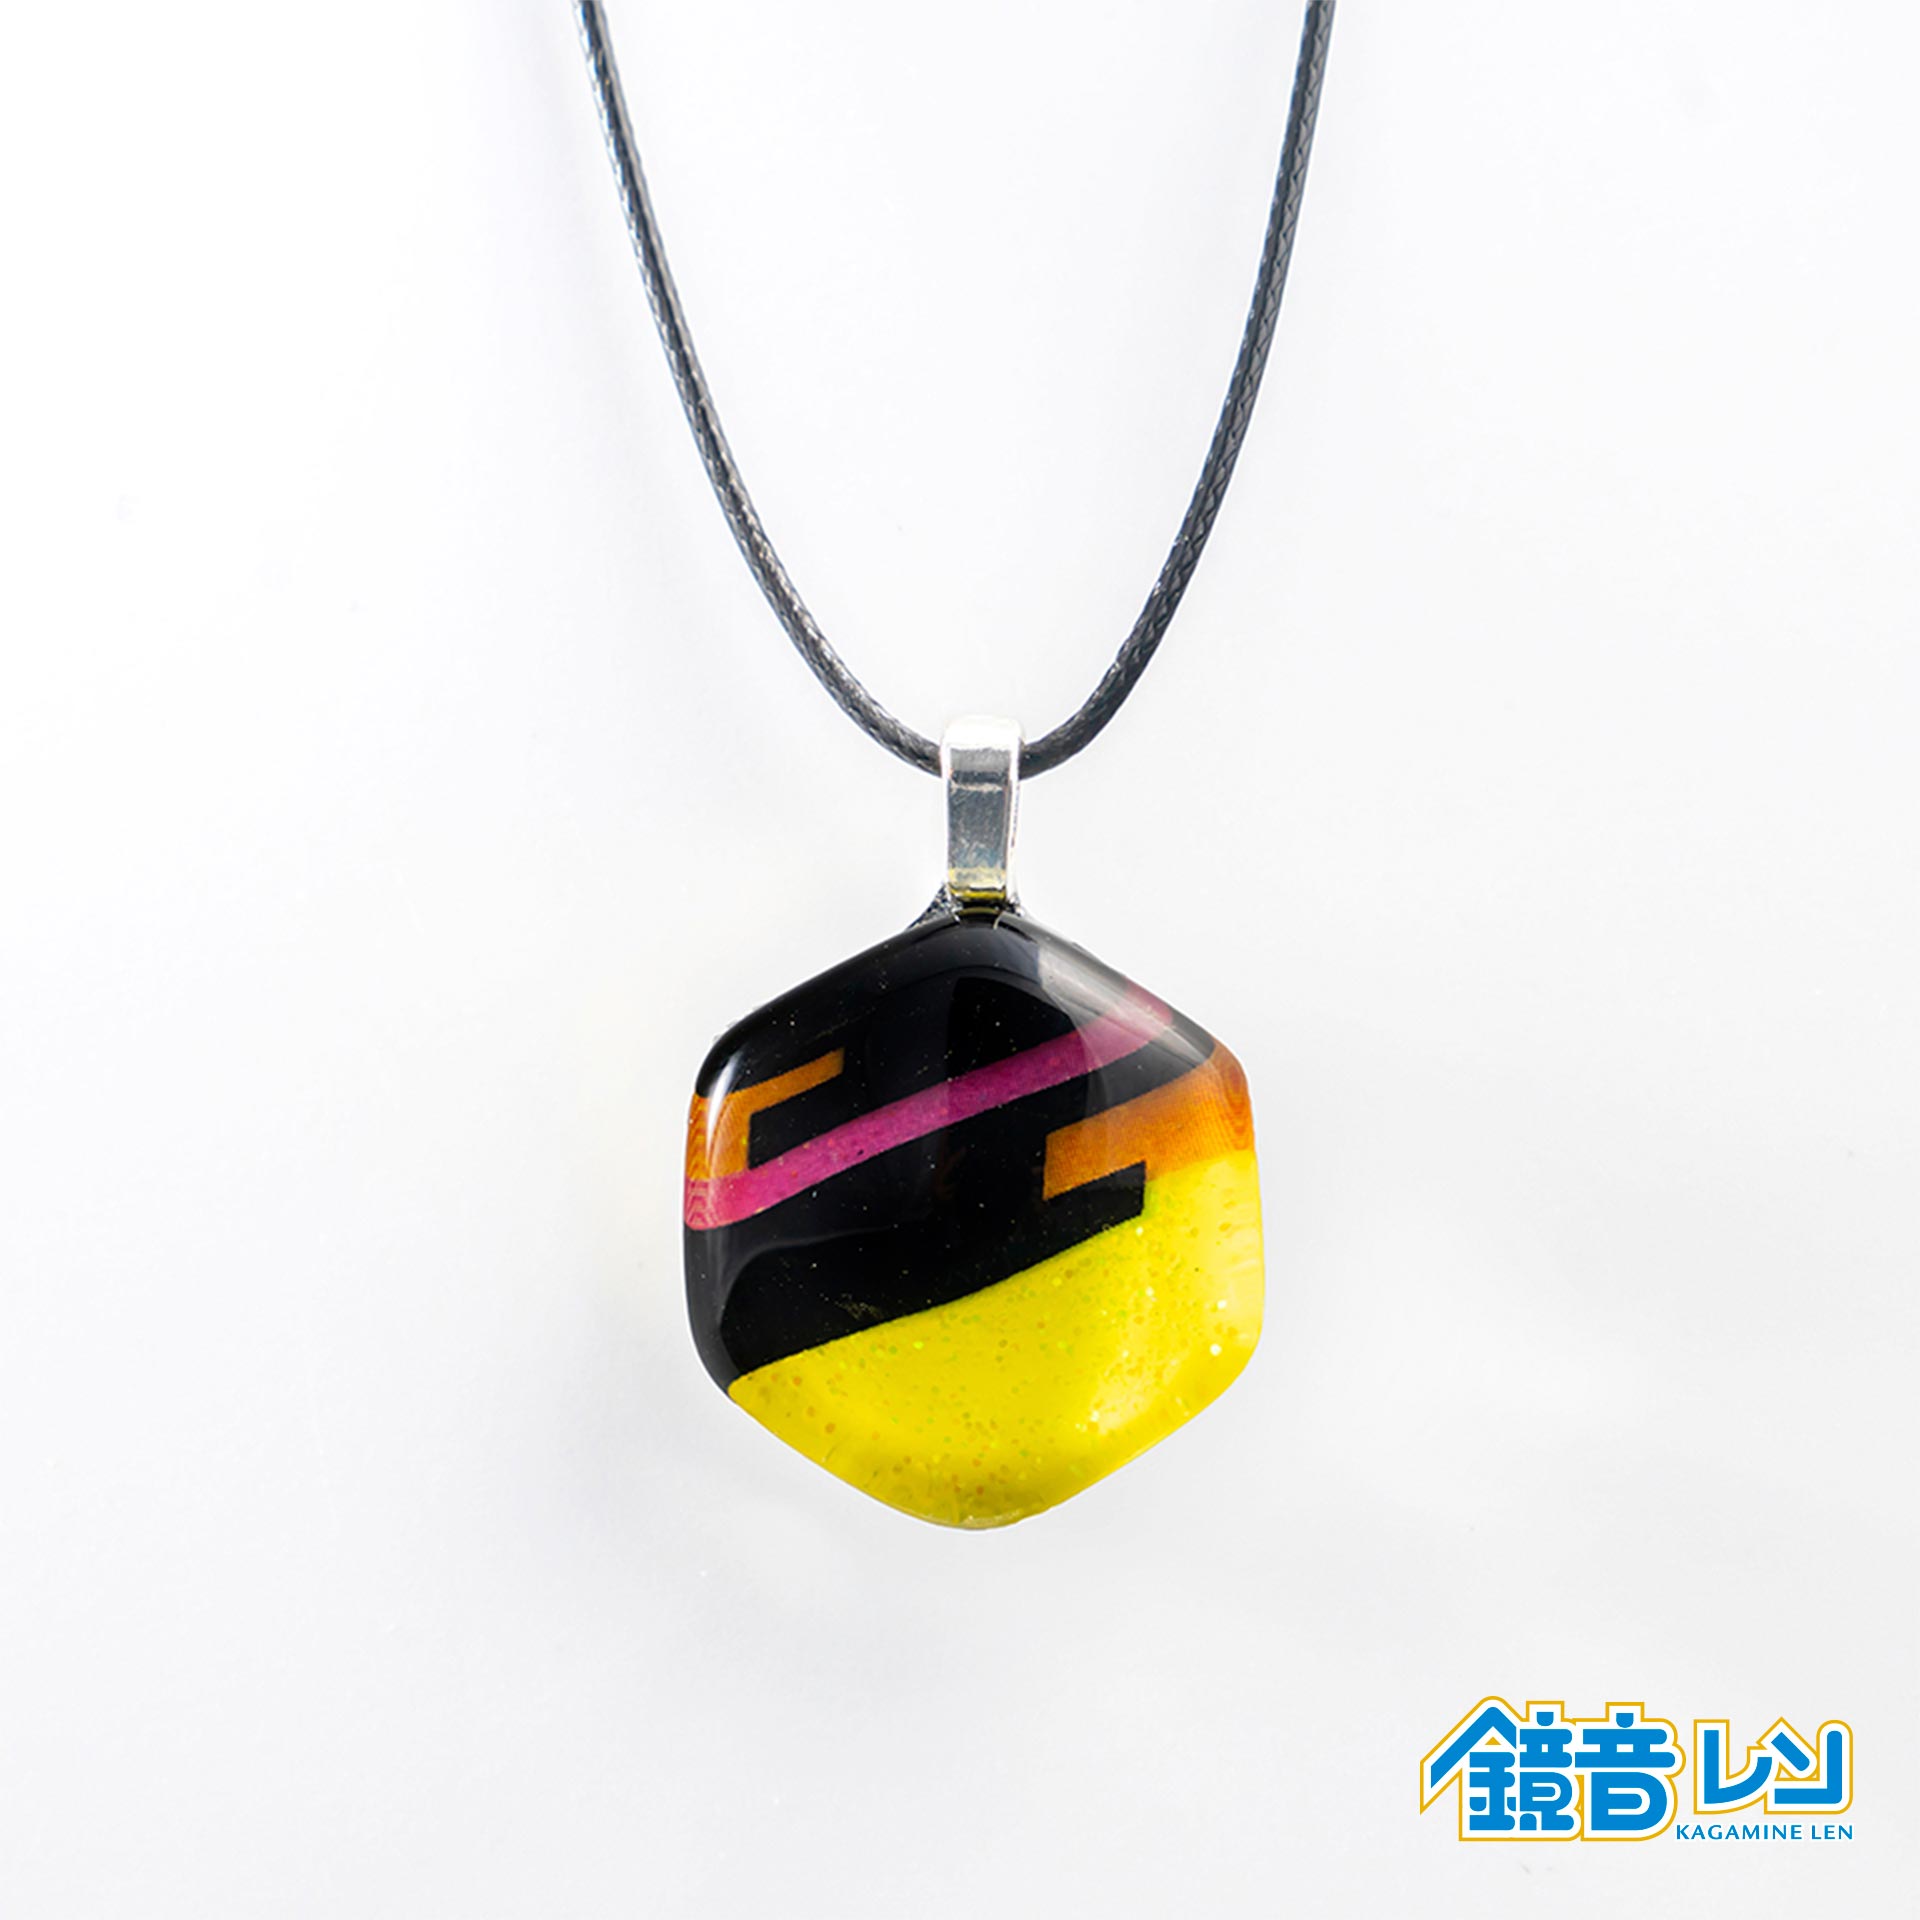 NORTH ONE GLASS jewelry 鏡音レン ネックレス-